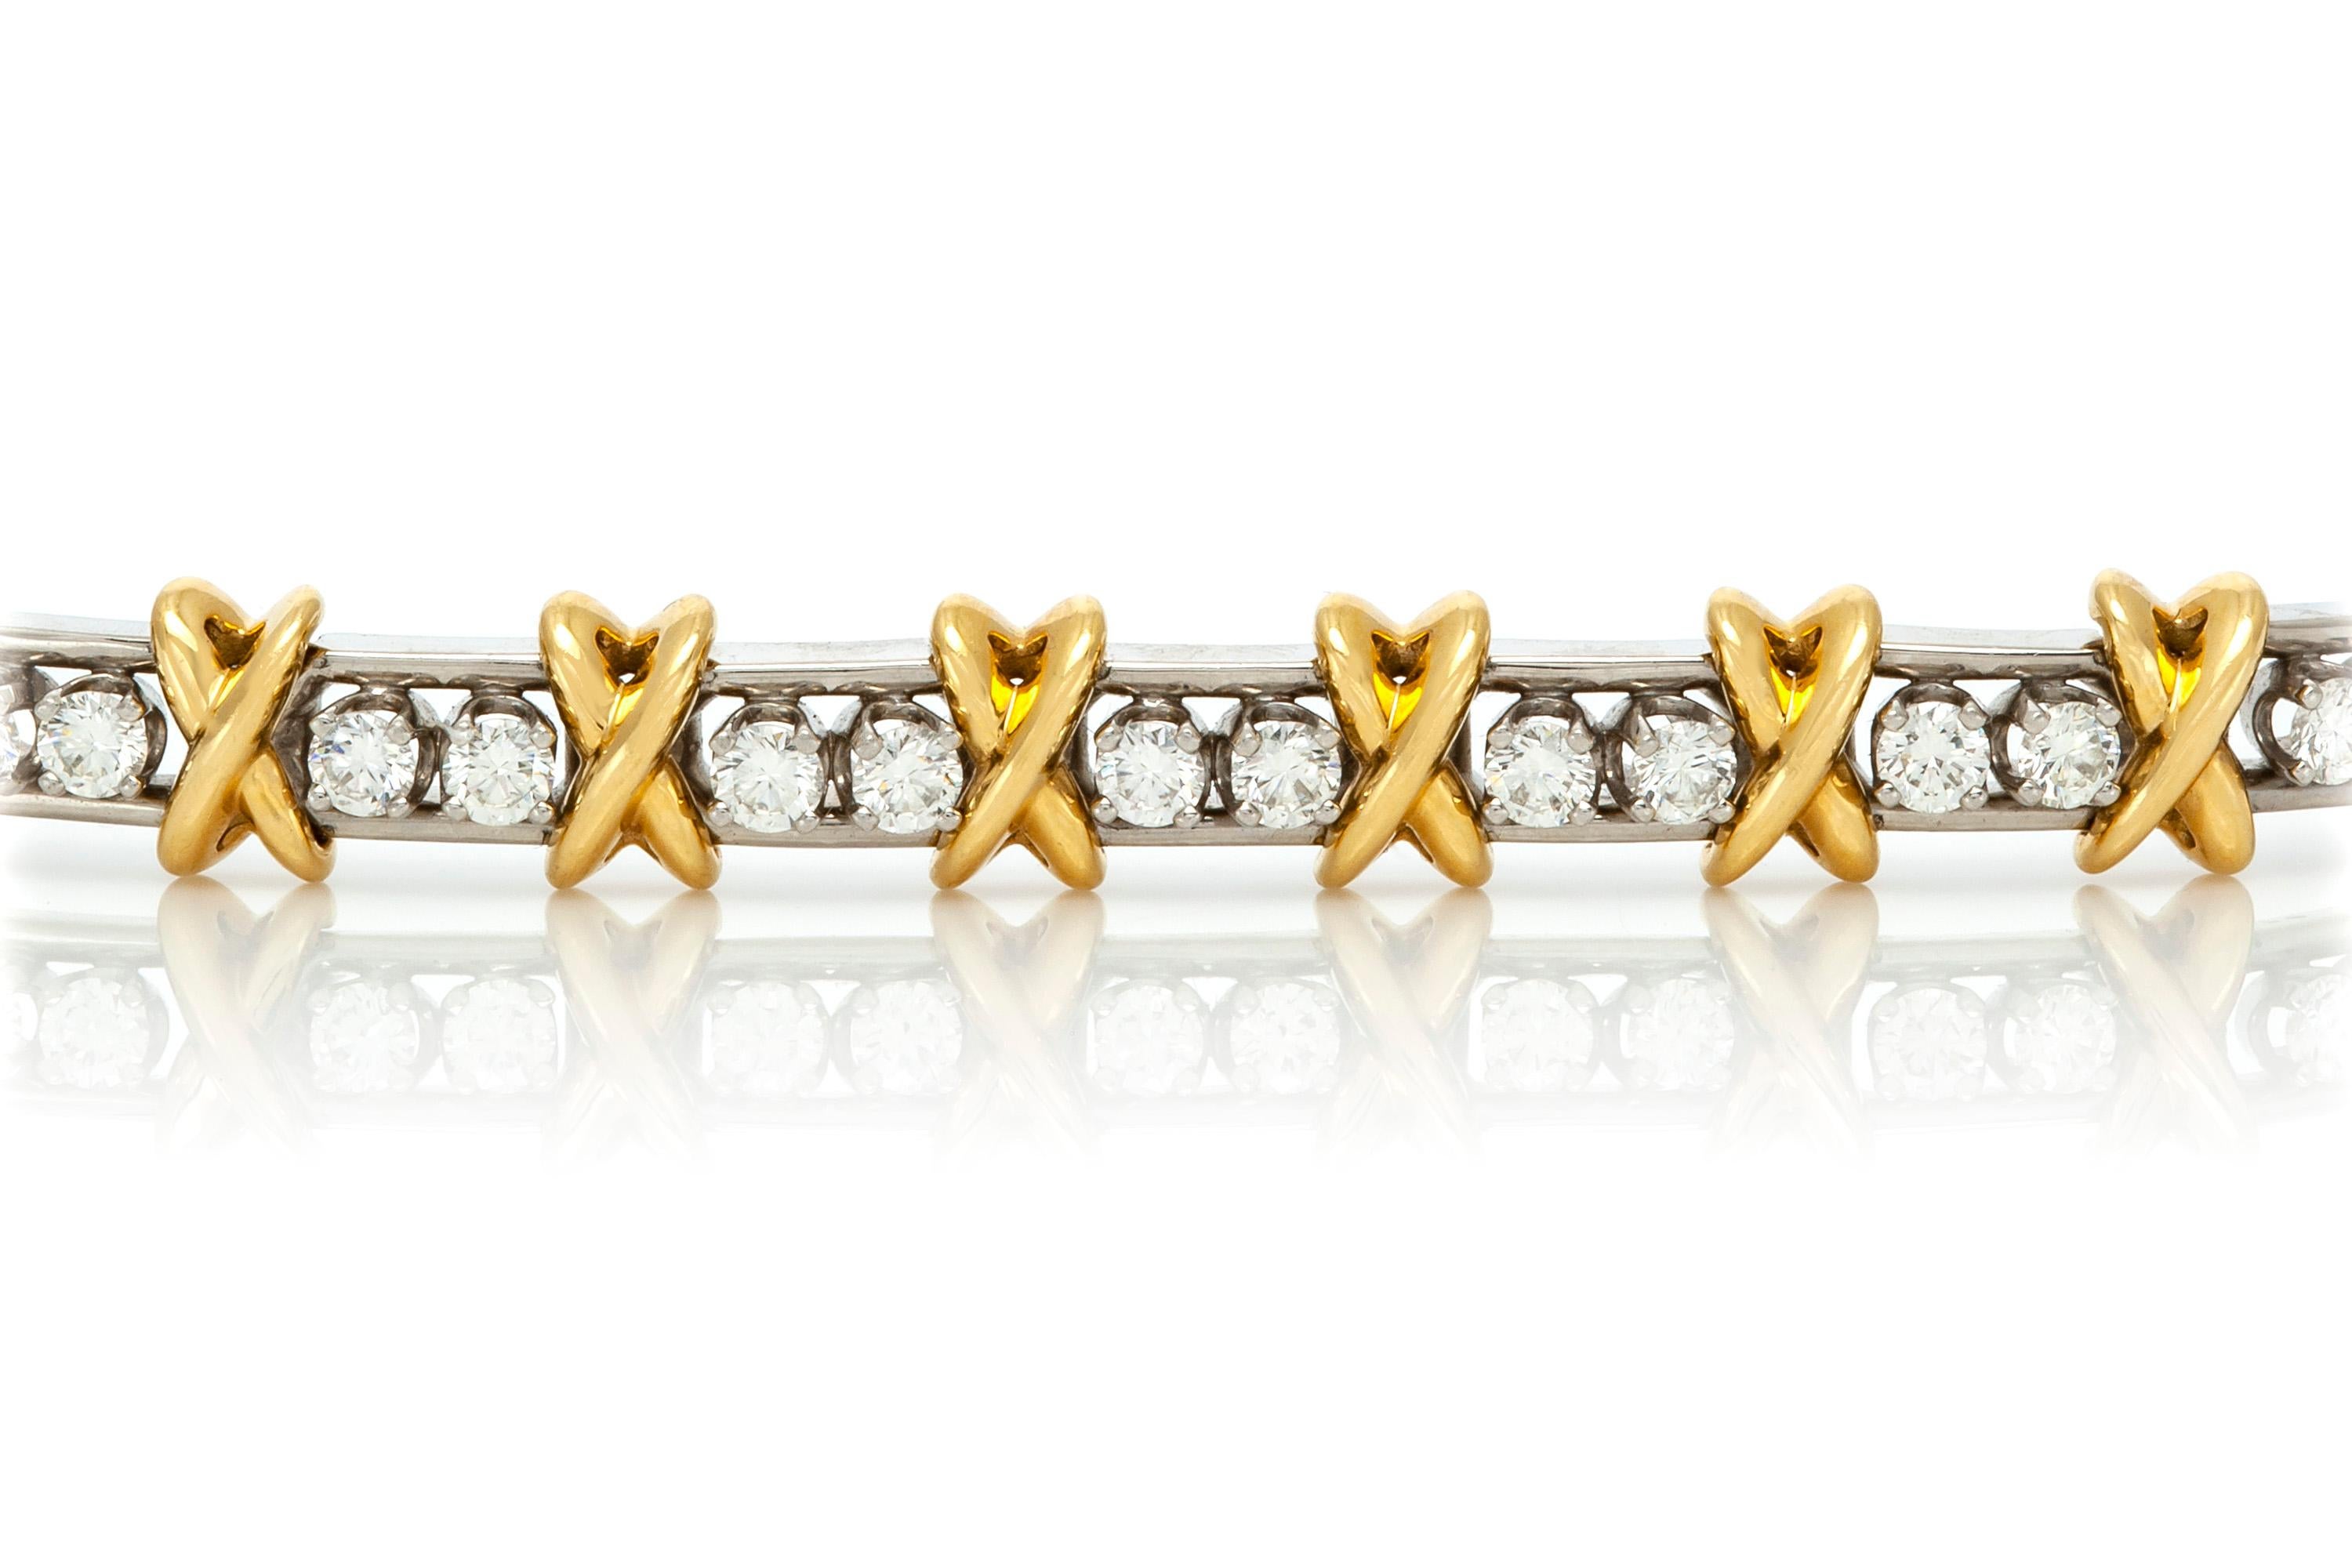 Tiffany & Co. Schlumberger bracelet, finely crafted in 18k gold with 36 stones.
Circa 1980's.